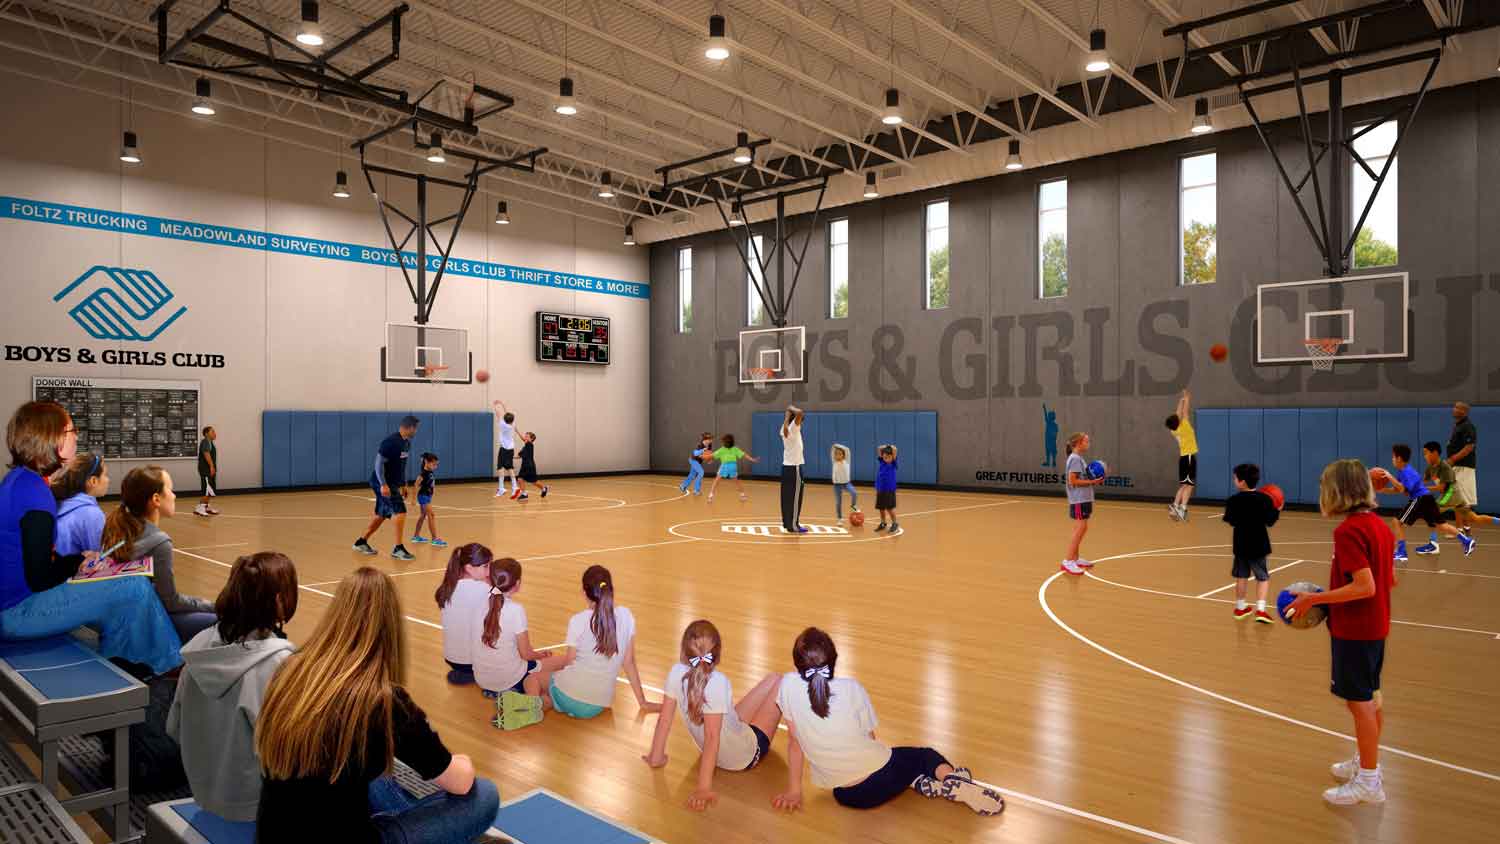 Boys and Girls club building design. Indoor gym architecture Minnesota